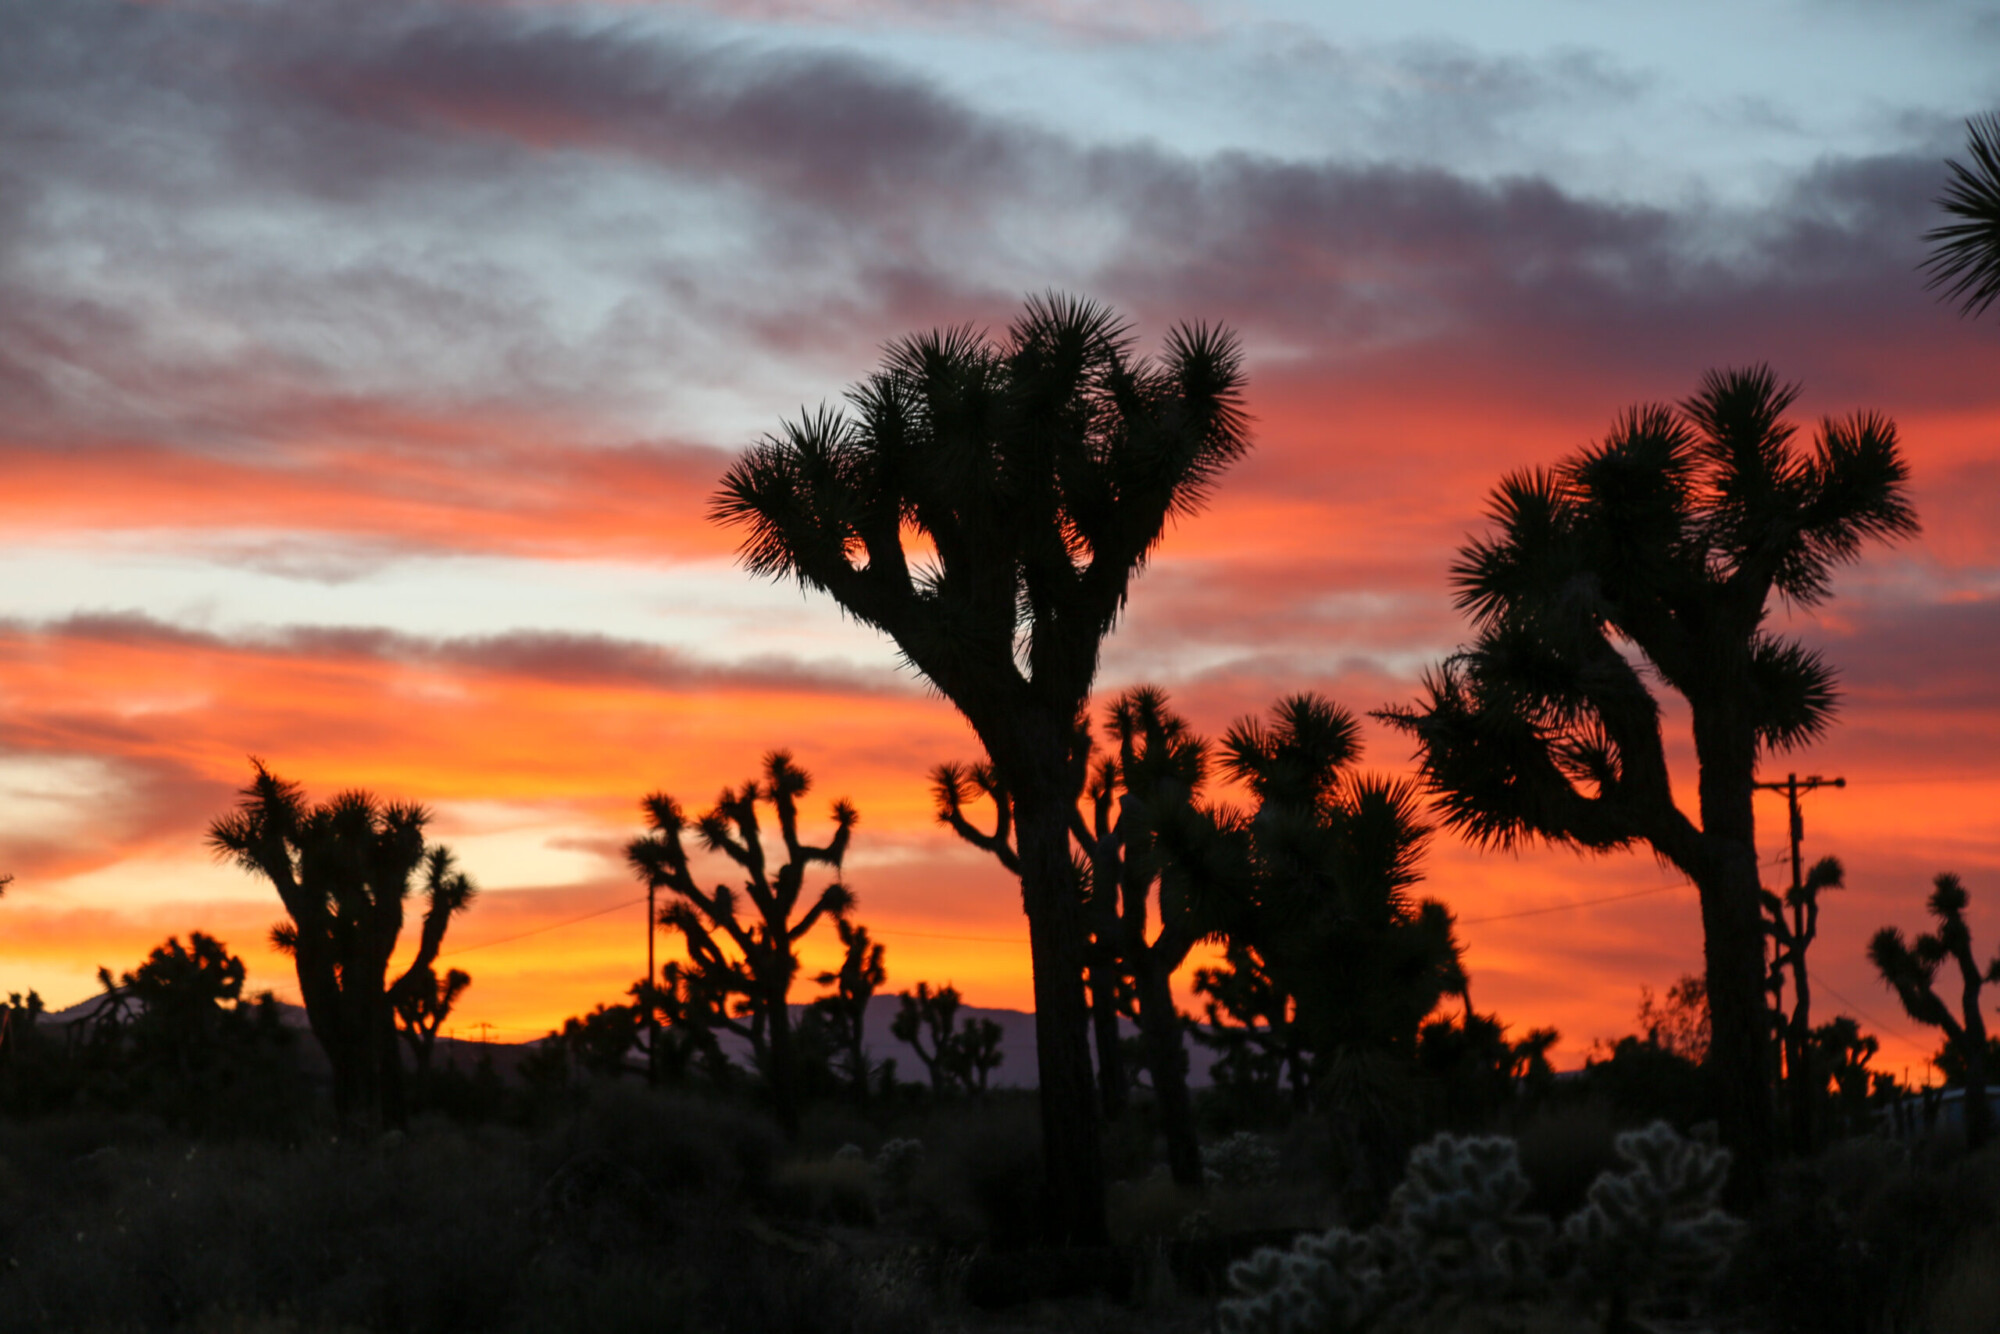 Joshua Tree silhouettes against a red and yellow sunset sky near Joshua Tree National Park, California.